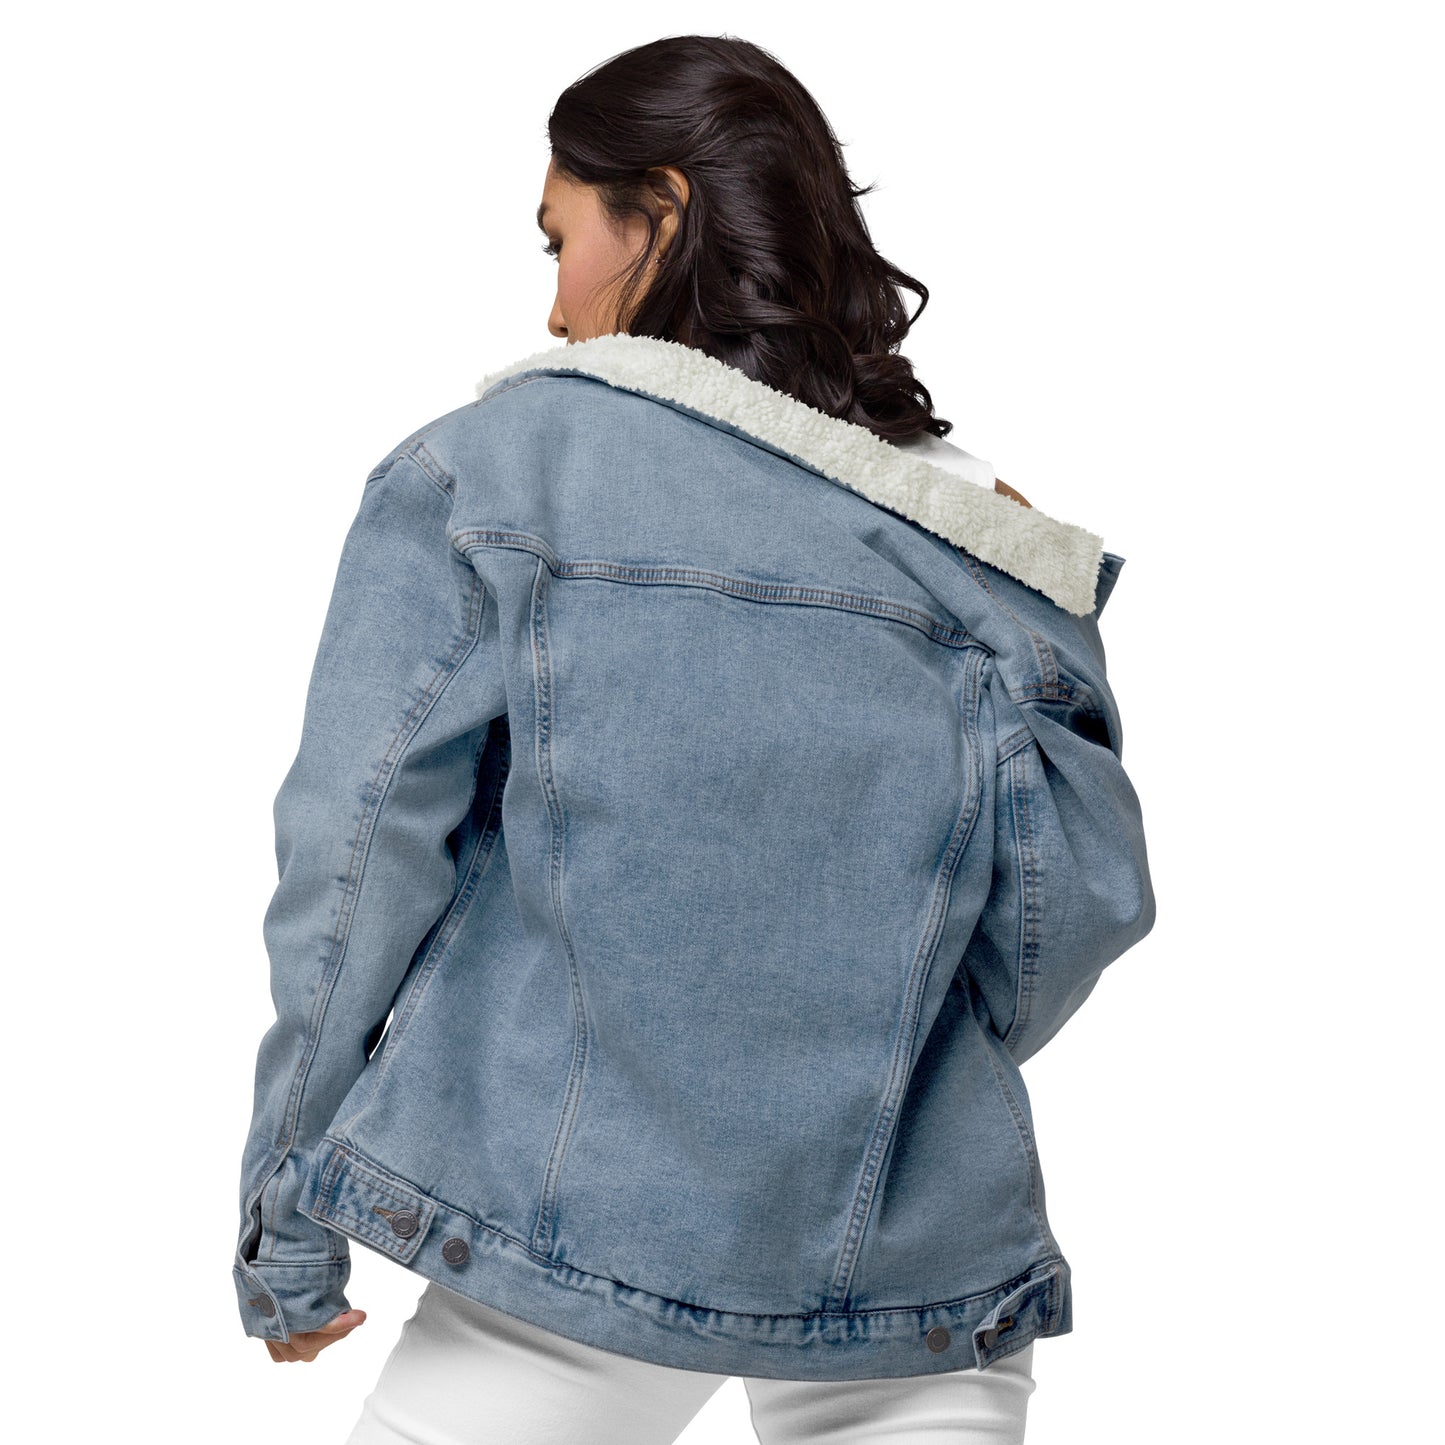 Adonis-Creations - Women's Embroidered Denim Jacket With Fur